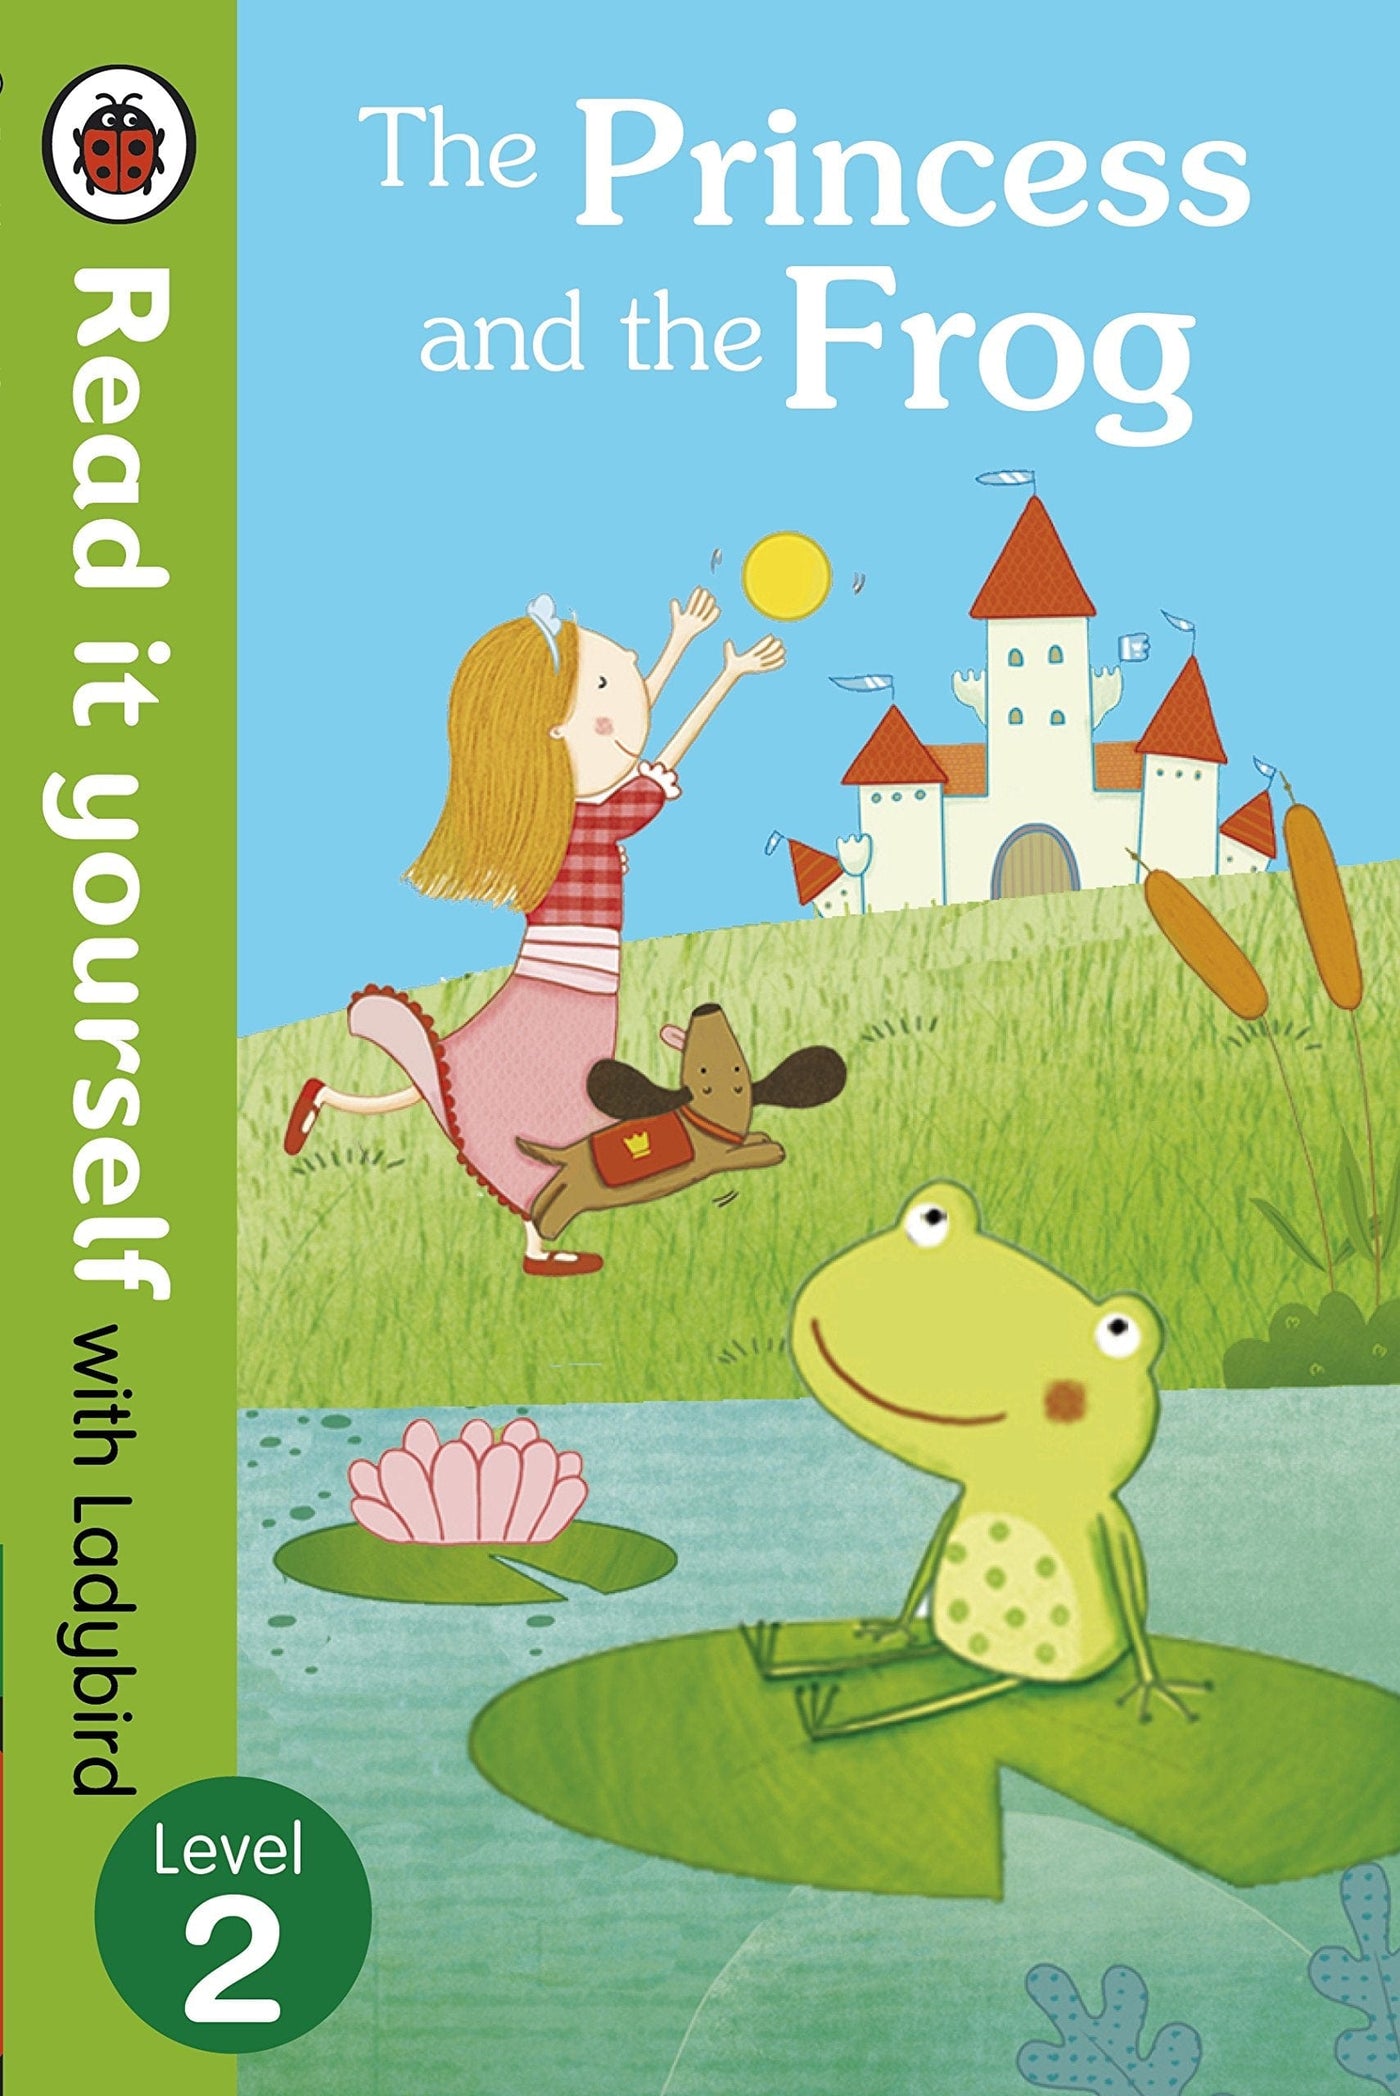 The Princess and the Frog: Read it Yourself (Level 2) - hardcover | Ladybird Books by Ladybird Books Book